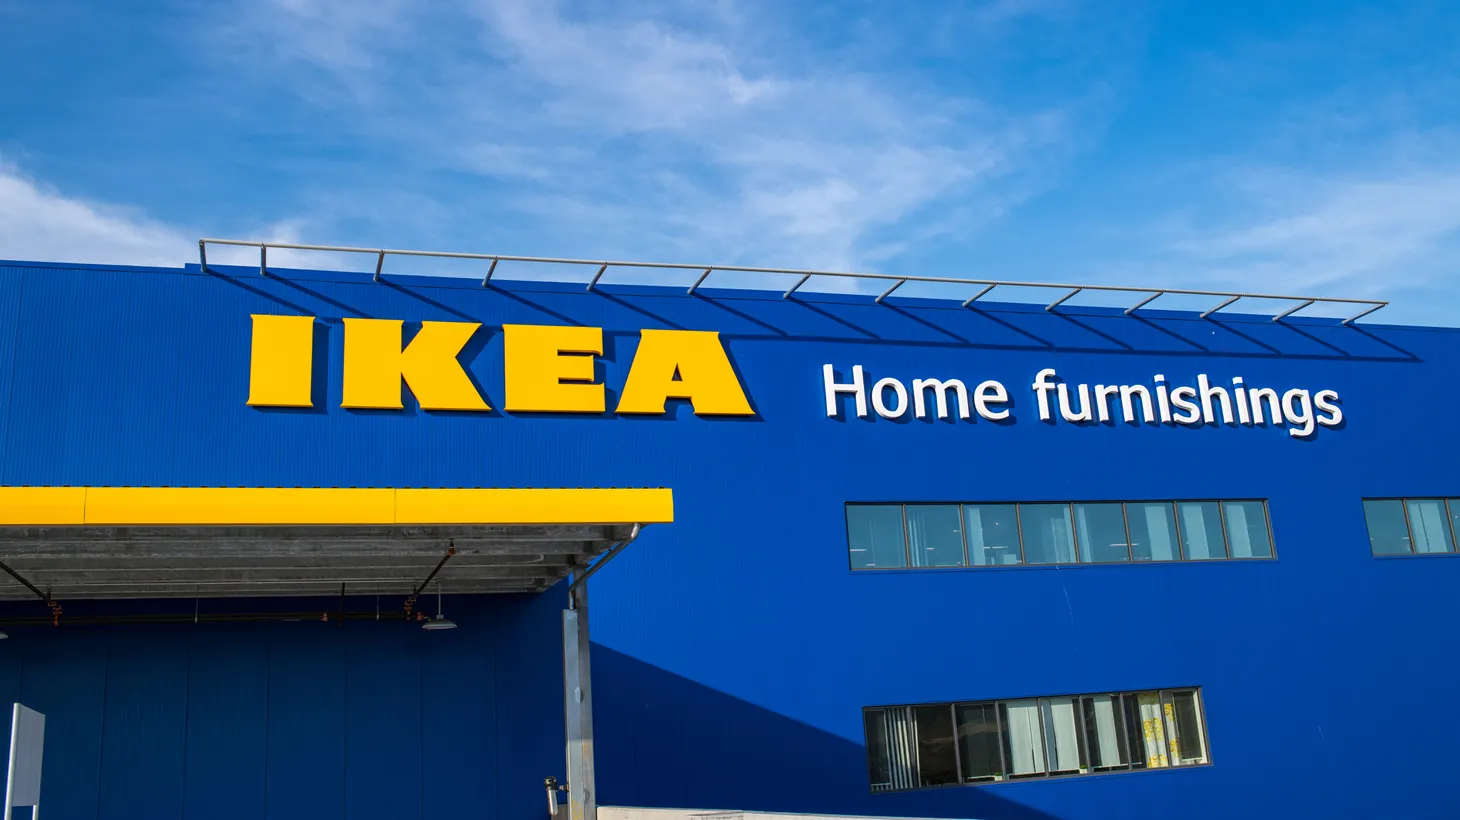 The 456,000-square-foot Burbank IKEA is the furniture giant’s largest location in the United States.